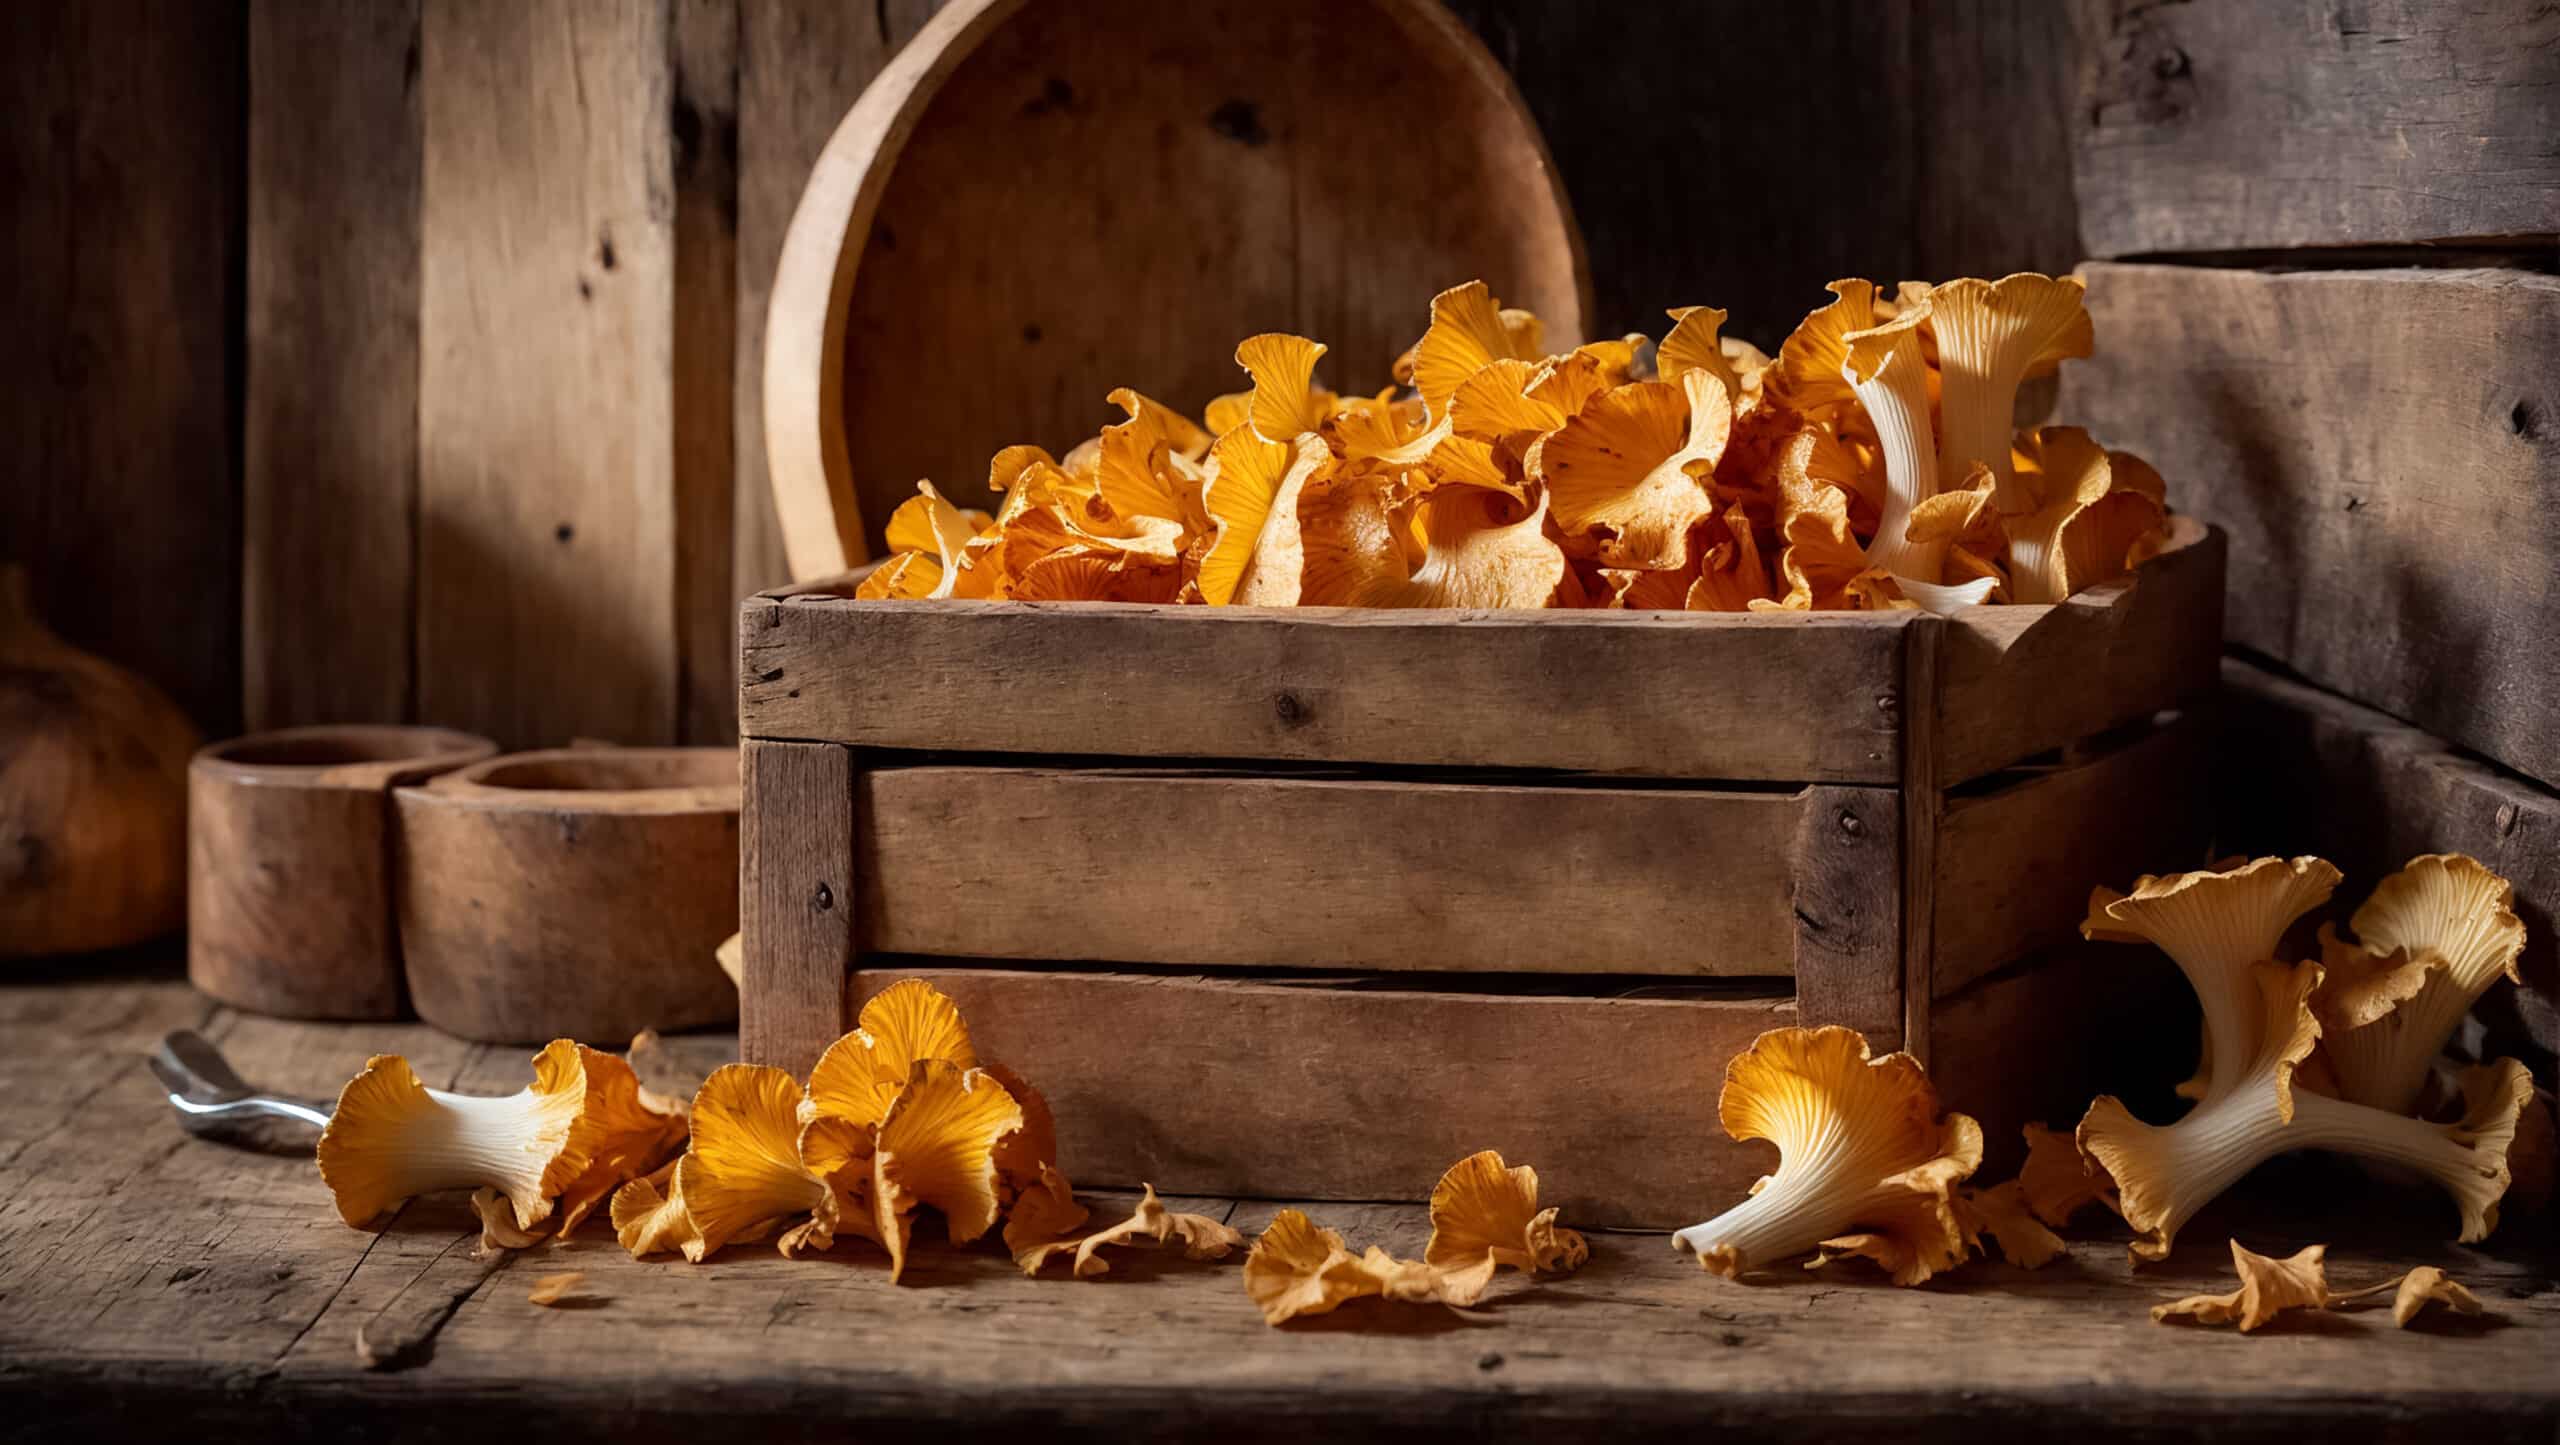 growmyownhealthfood.com : How do you tell if you have chicken of the woods?